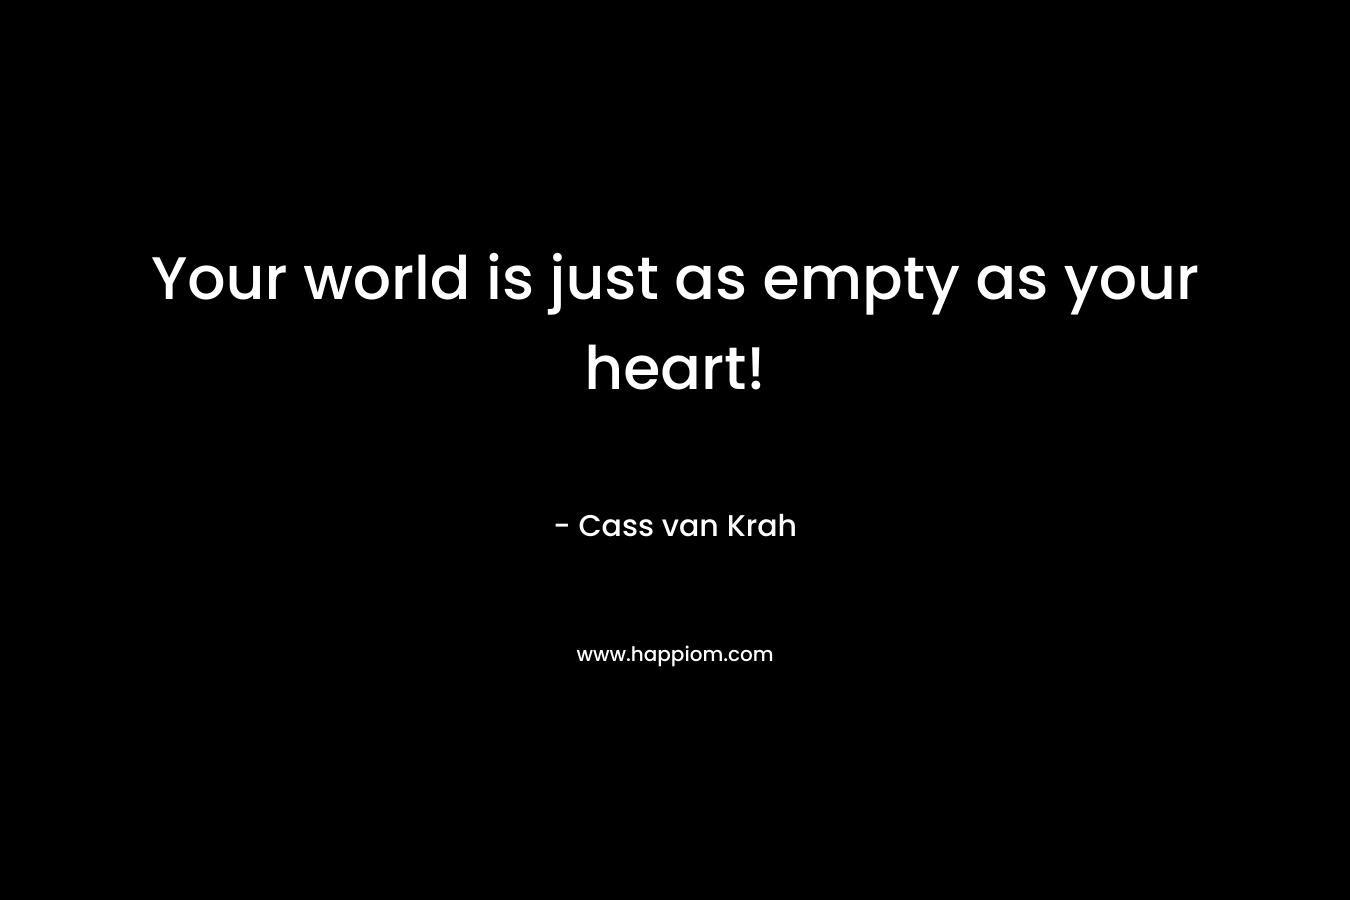 Your world is just as empty as your heart!